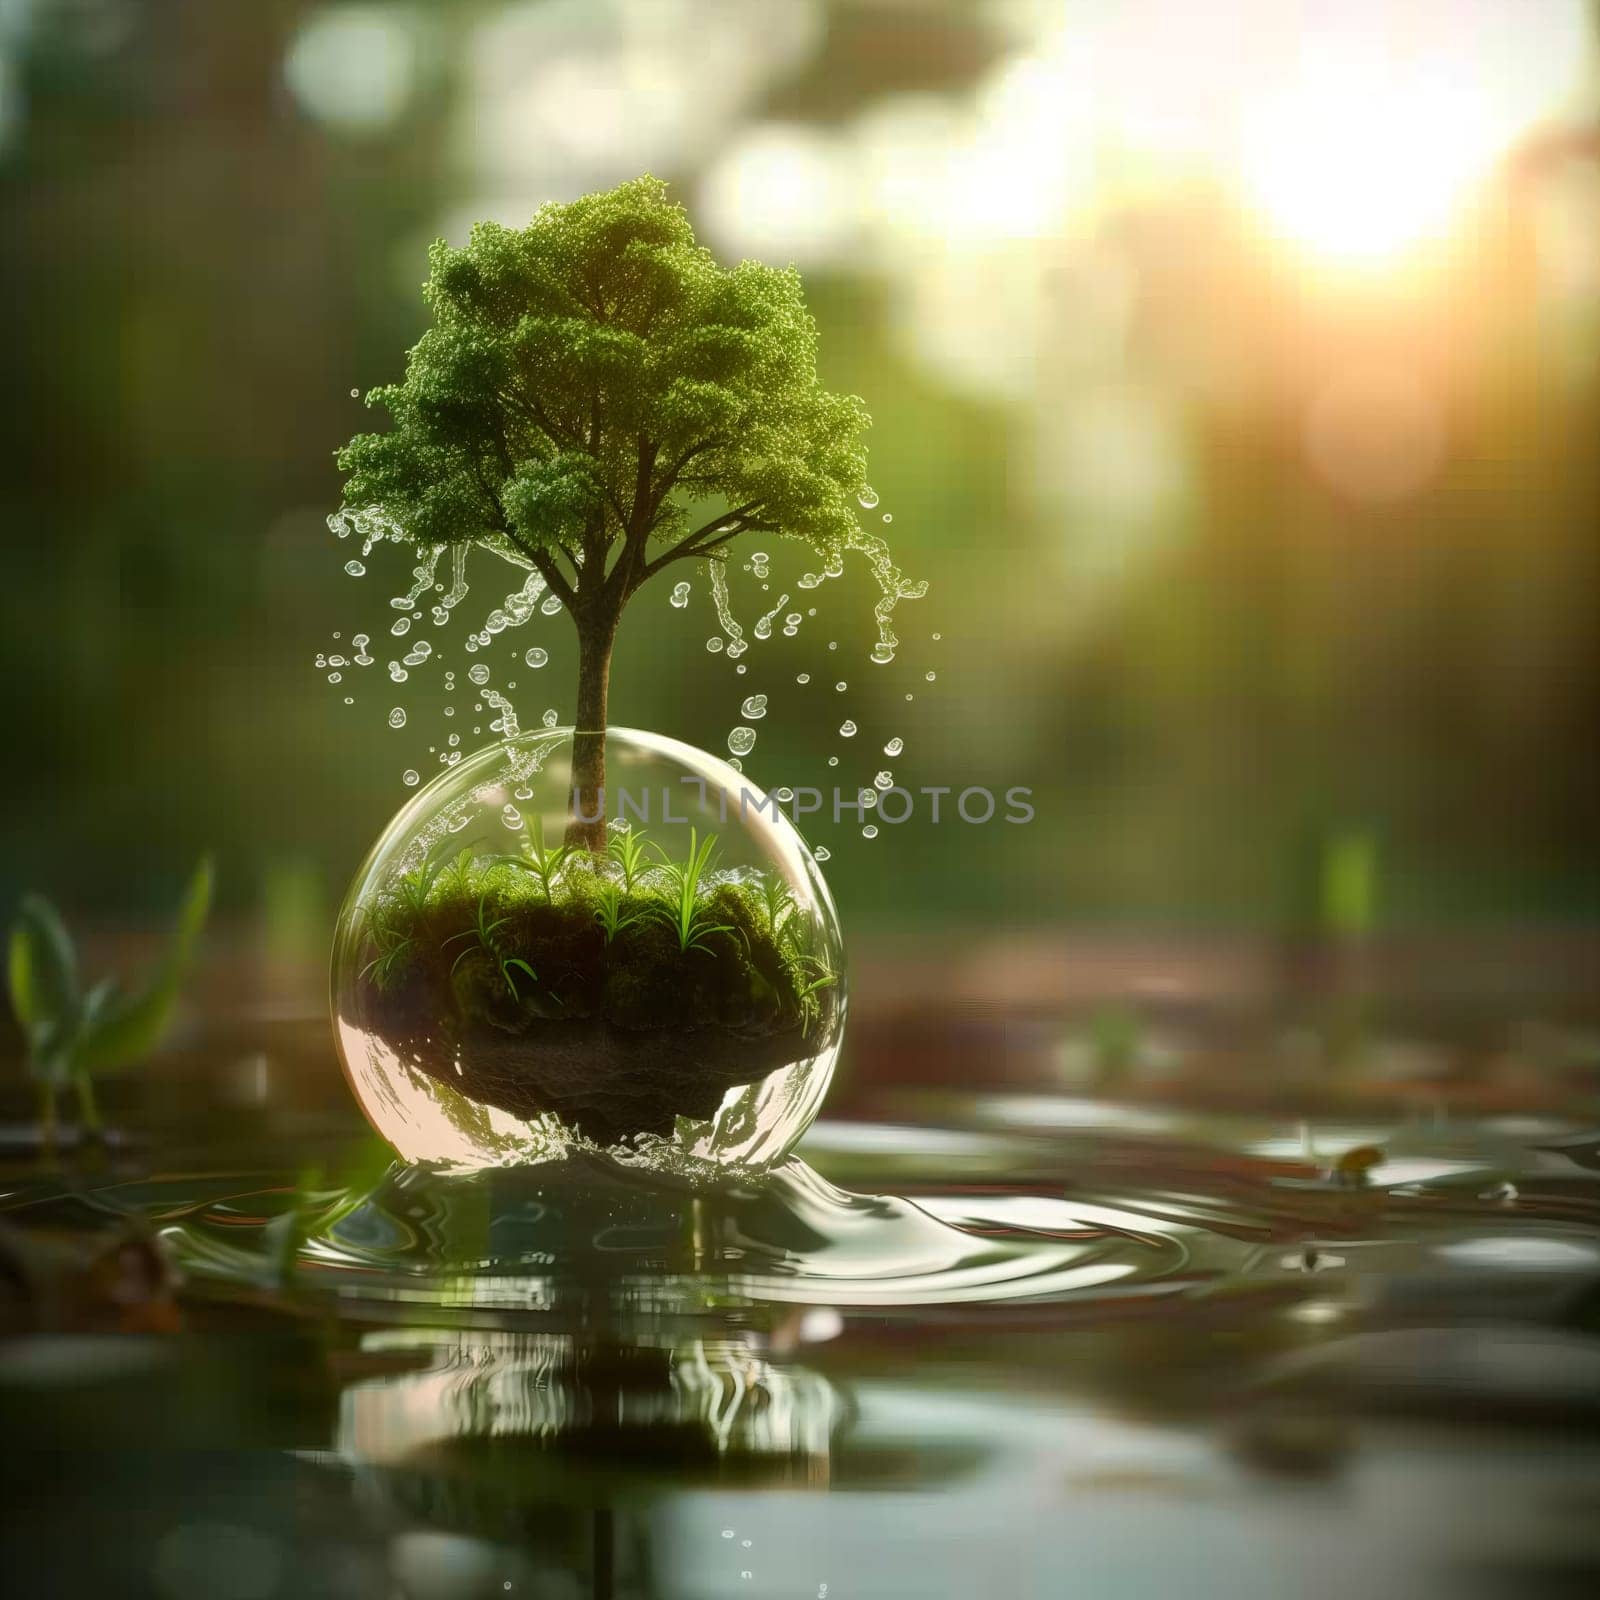 One glass ball with a tree and drops of water flowing from it against the backdrop of a blurry lake in the forest in the early morning, close-up side view.